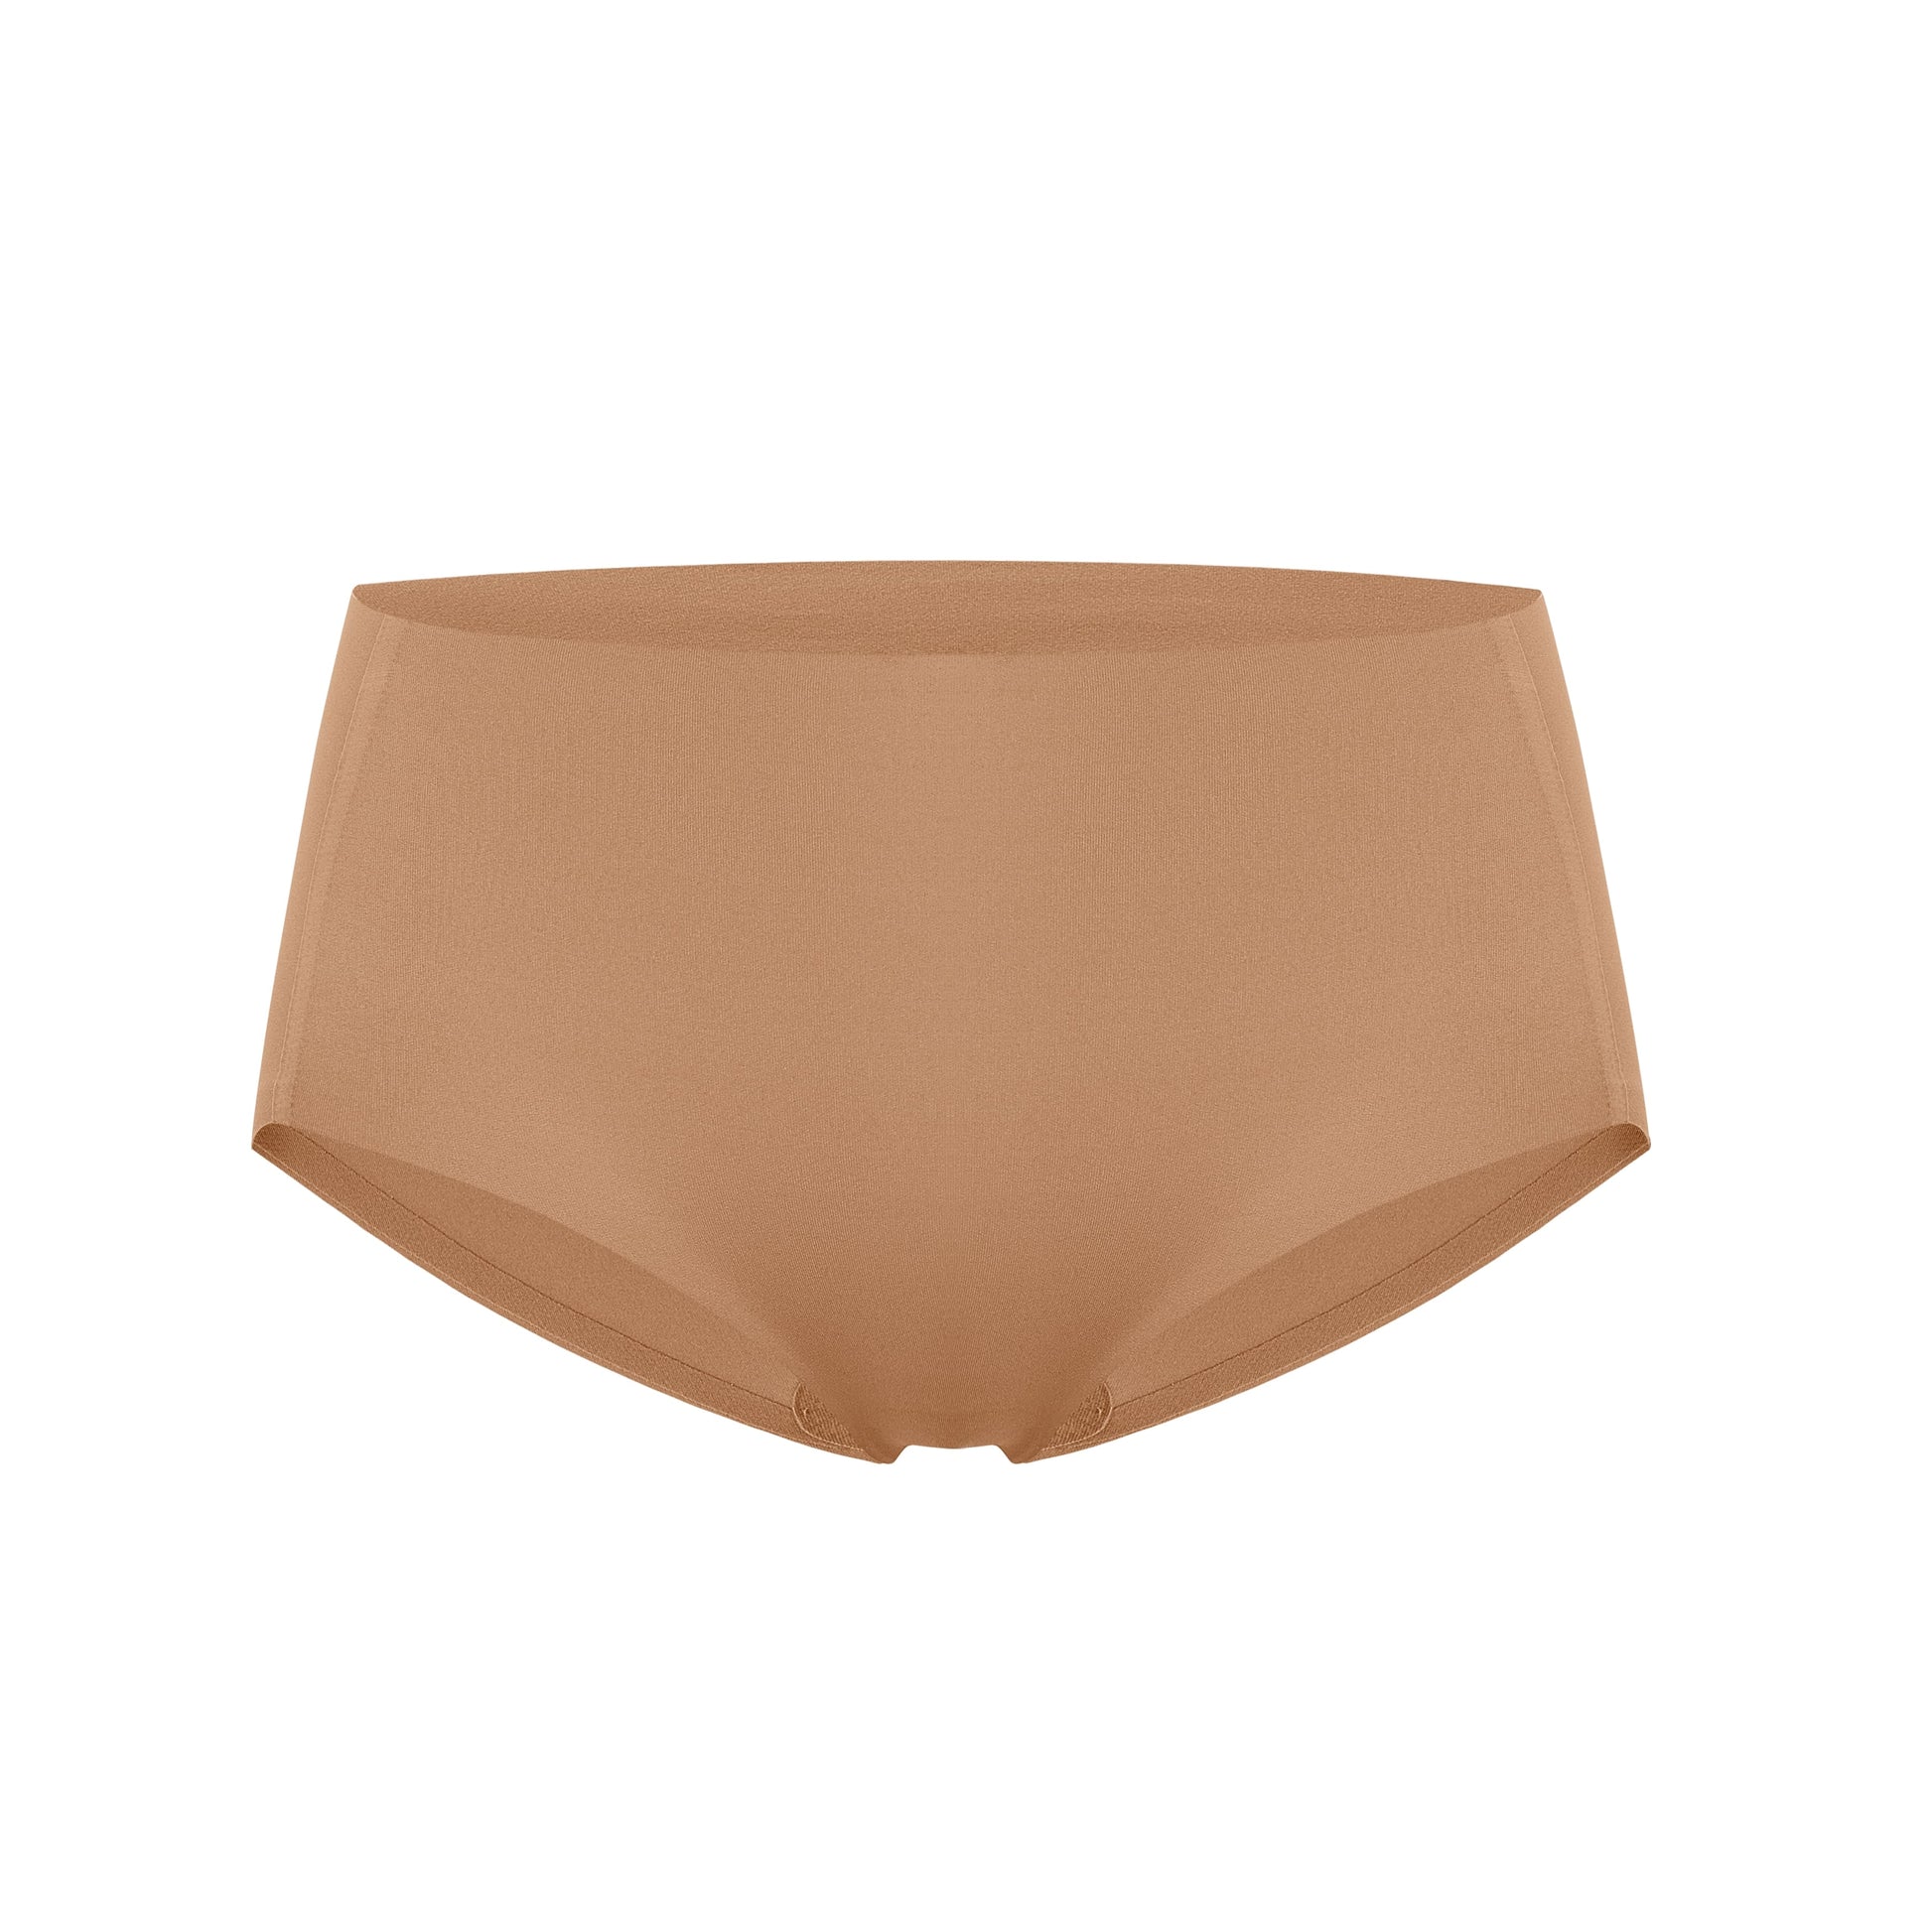 Vanity Fair Women's Underwear Nearly Invisible Panty, Totally Tan